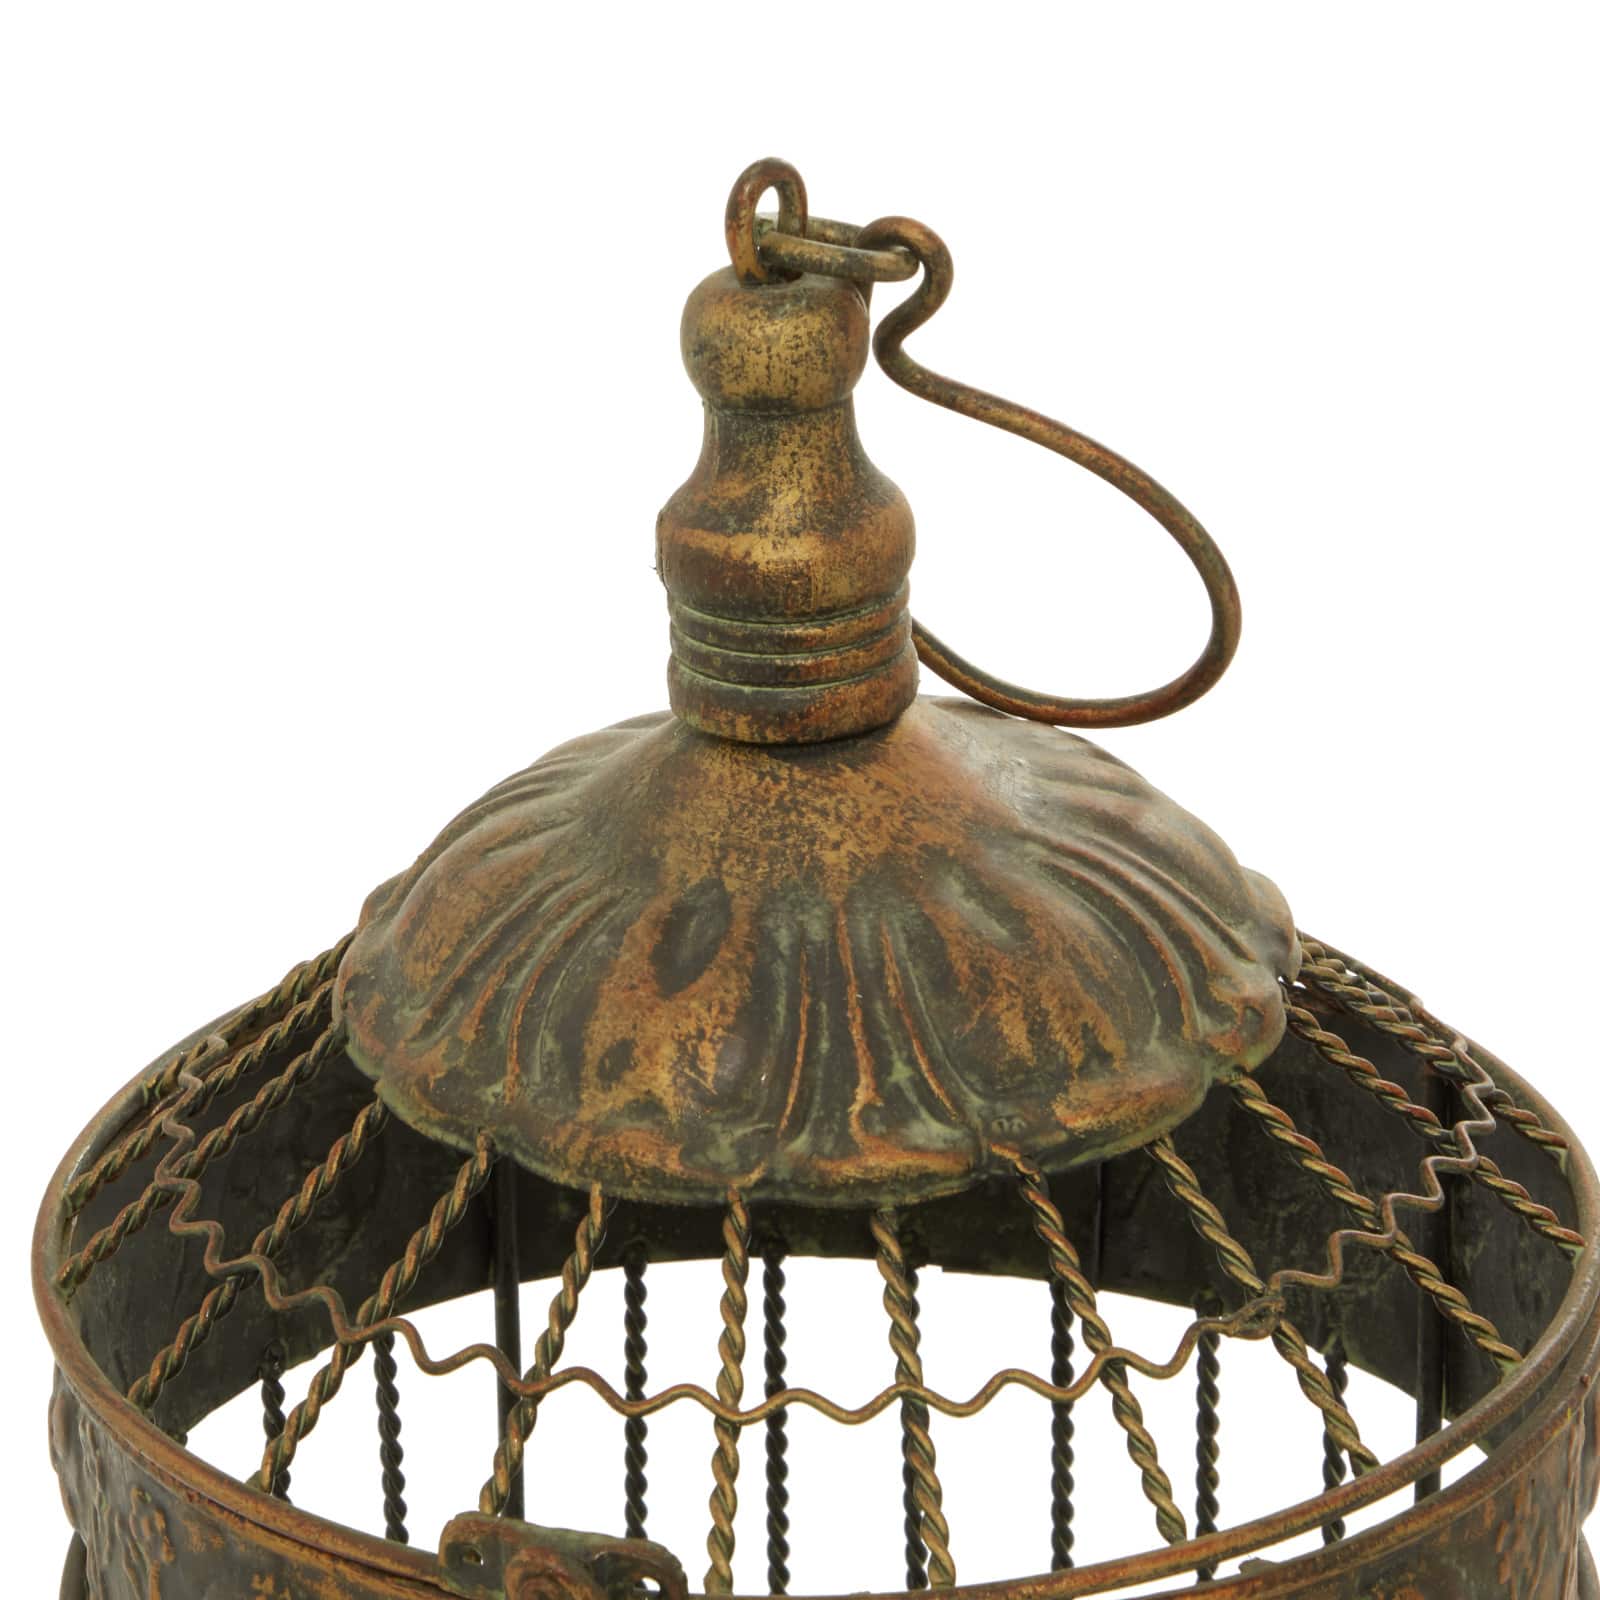 ANTIQUE BRASS BIRD CAGE - Able Auctions